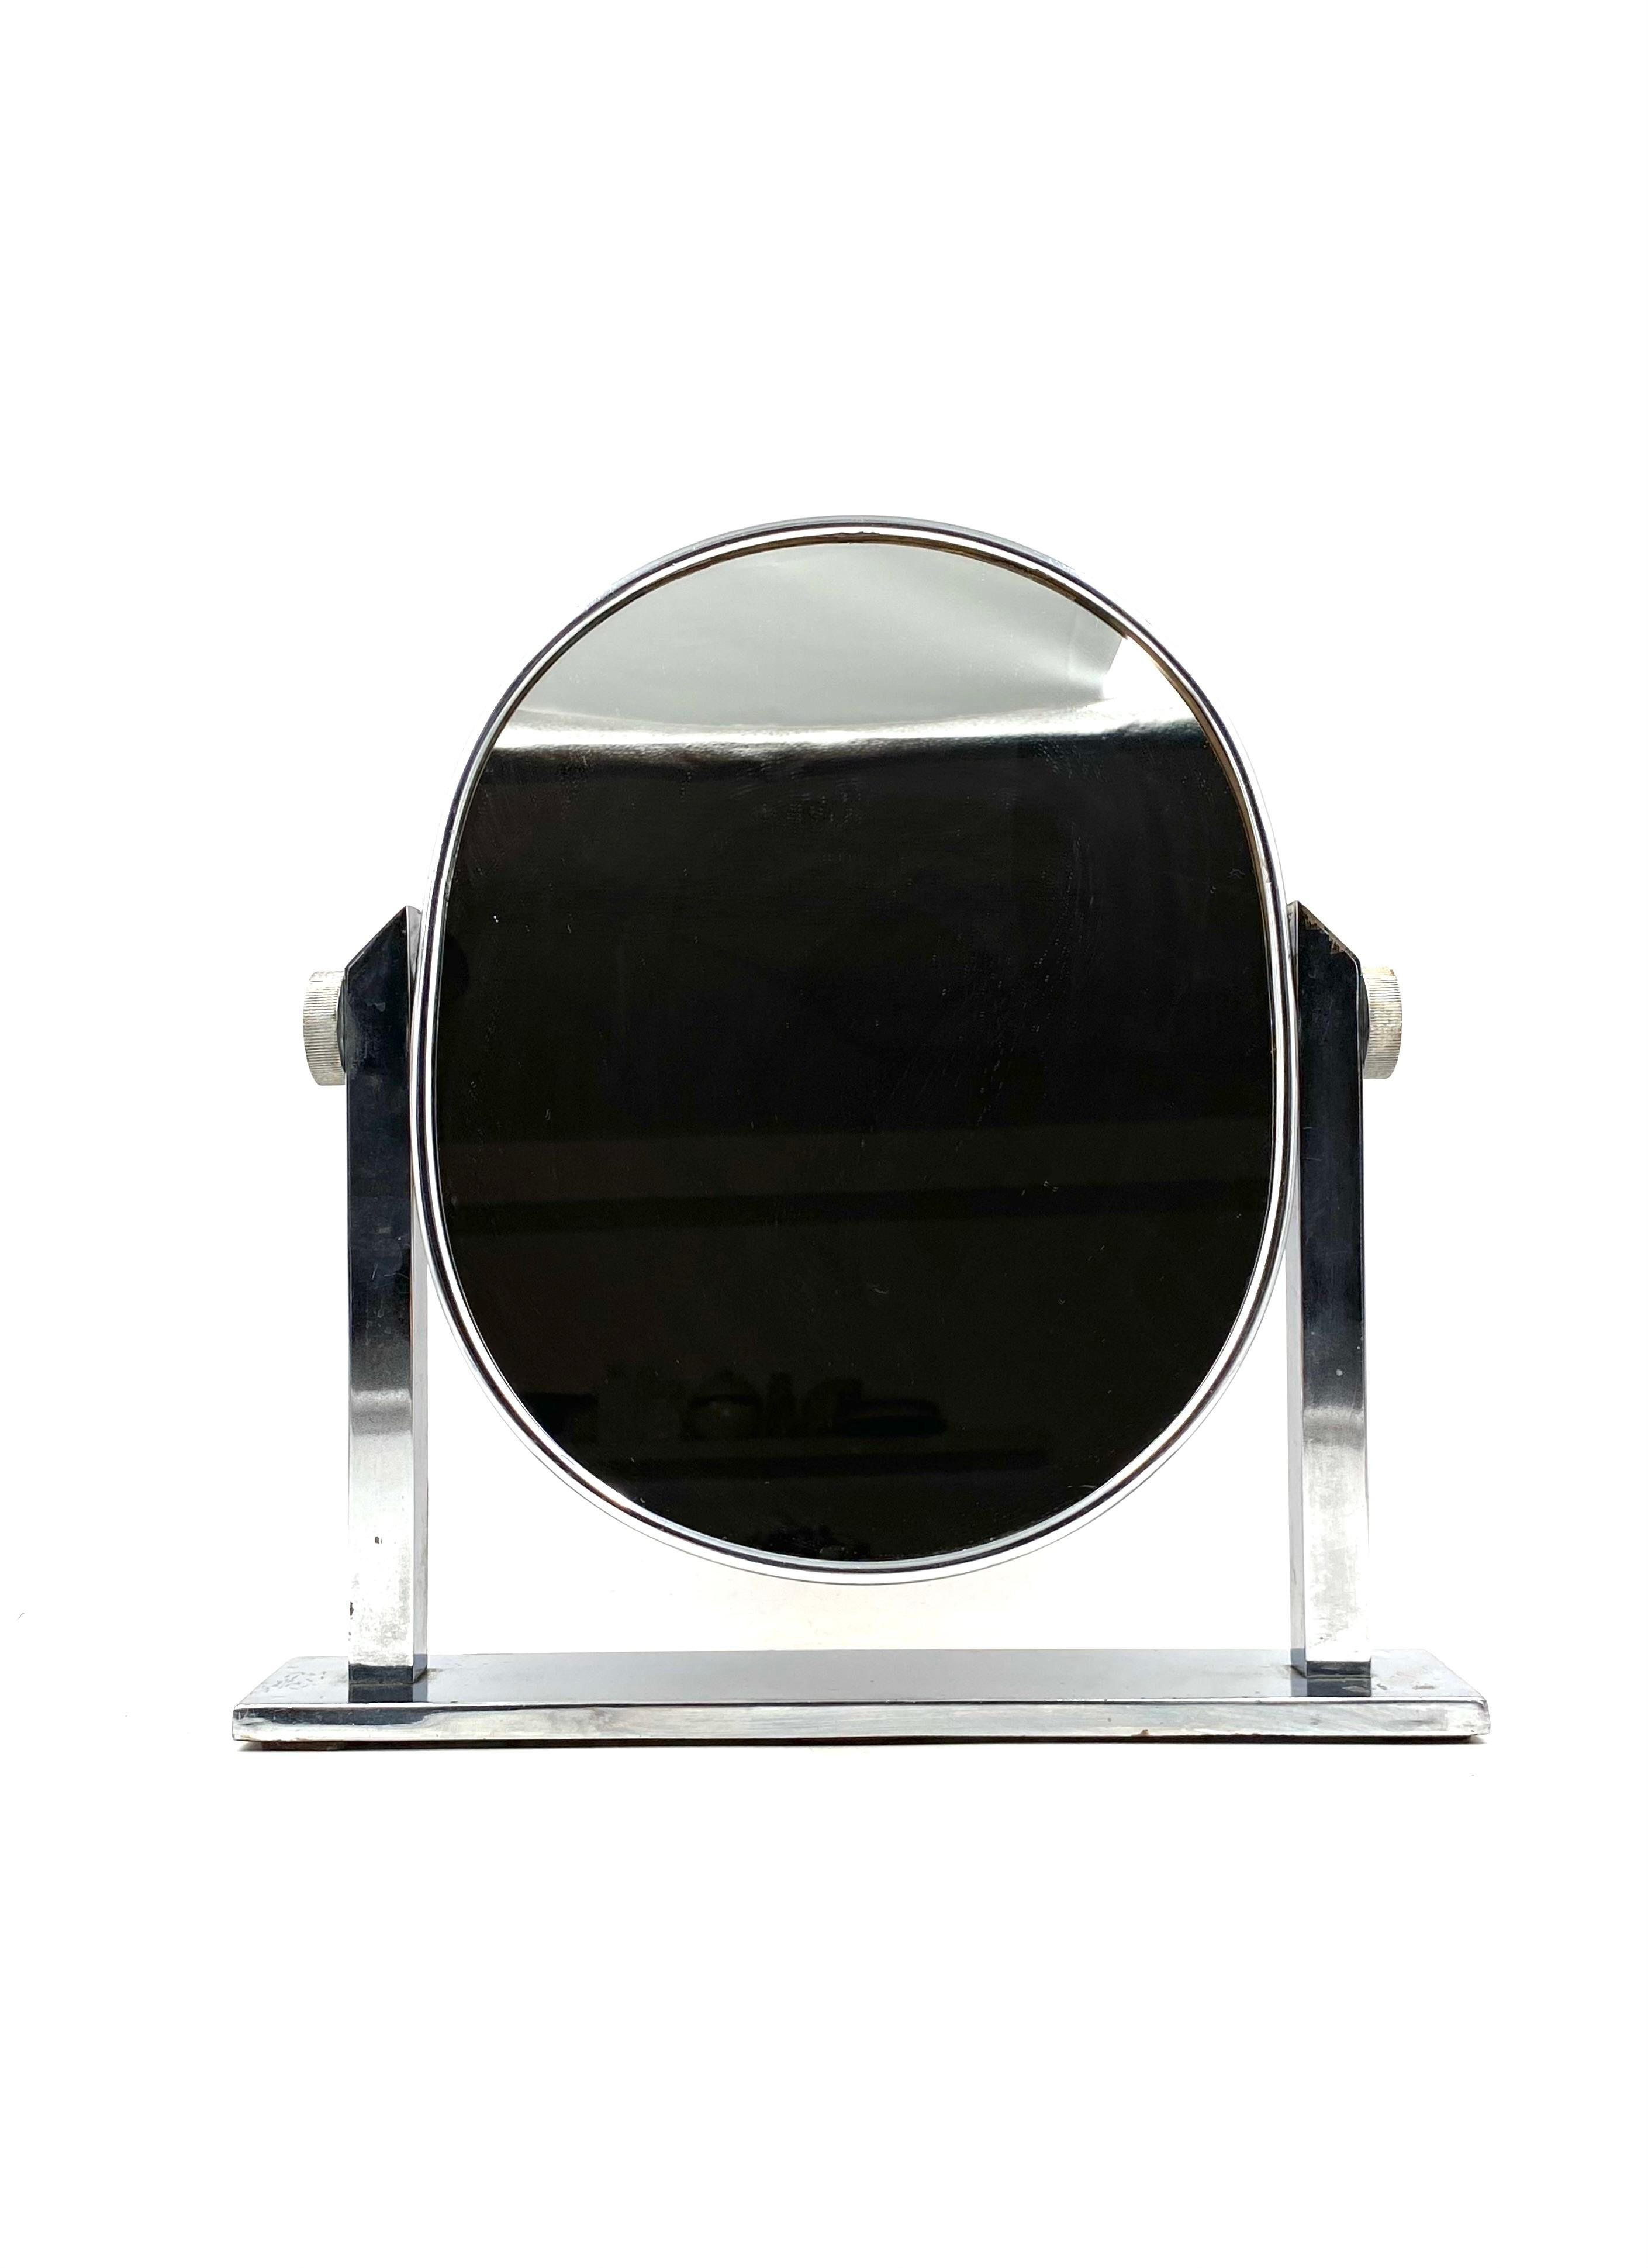 Midcentury Nickel-Plated Brass Table Mirror / Vanity, Italy, 1960s For Sale 1